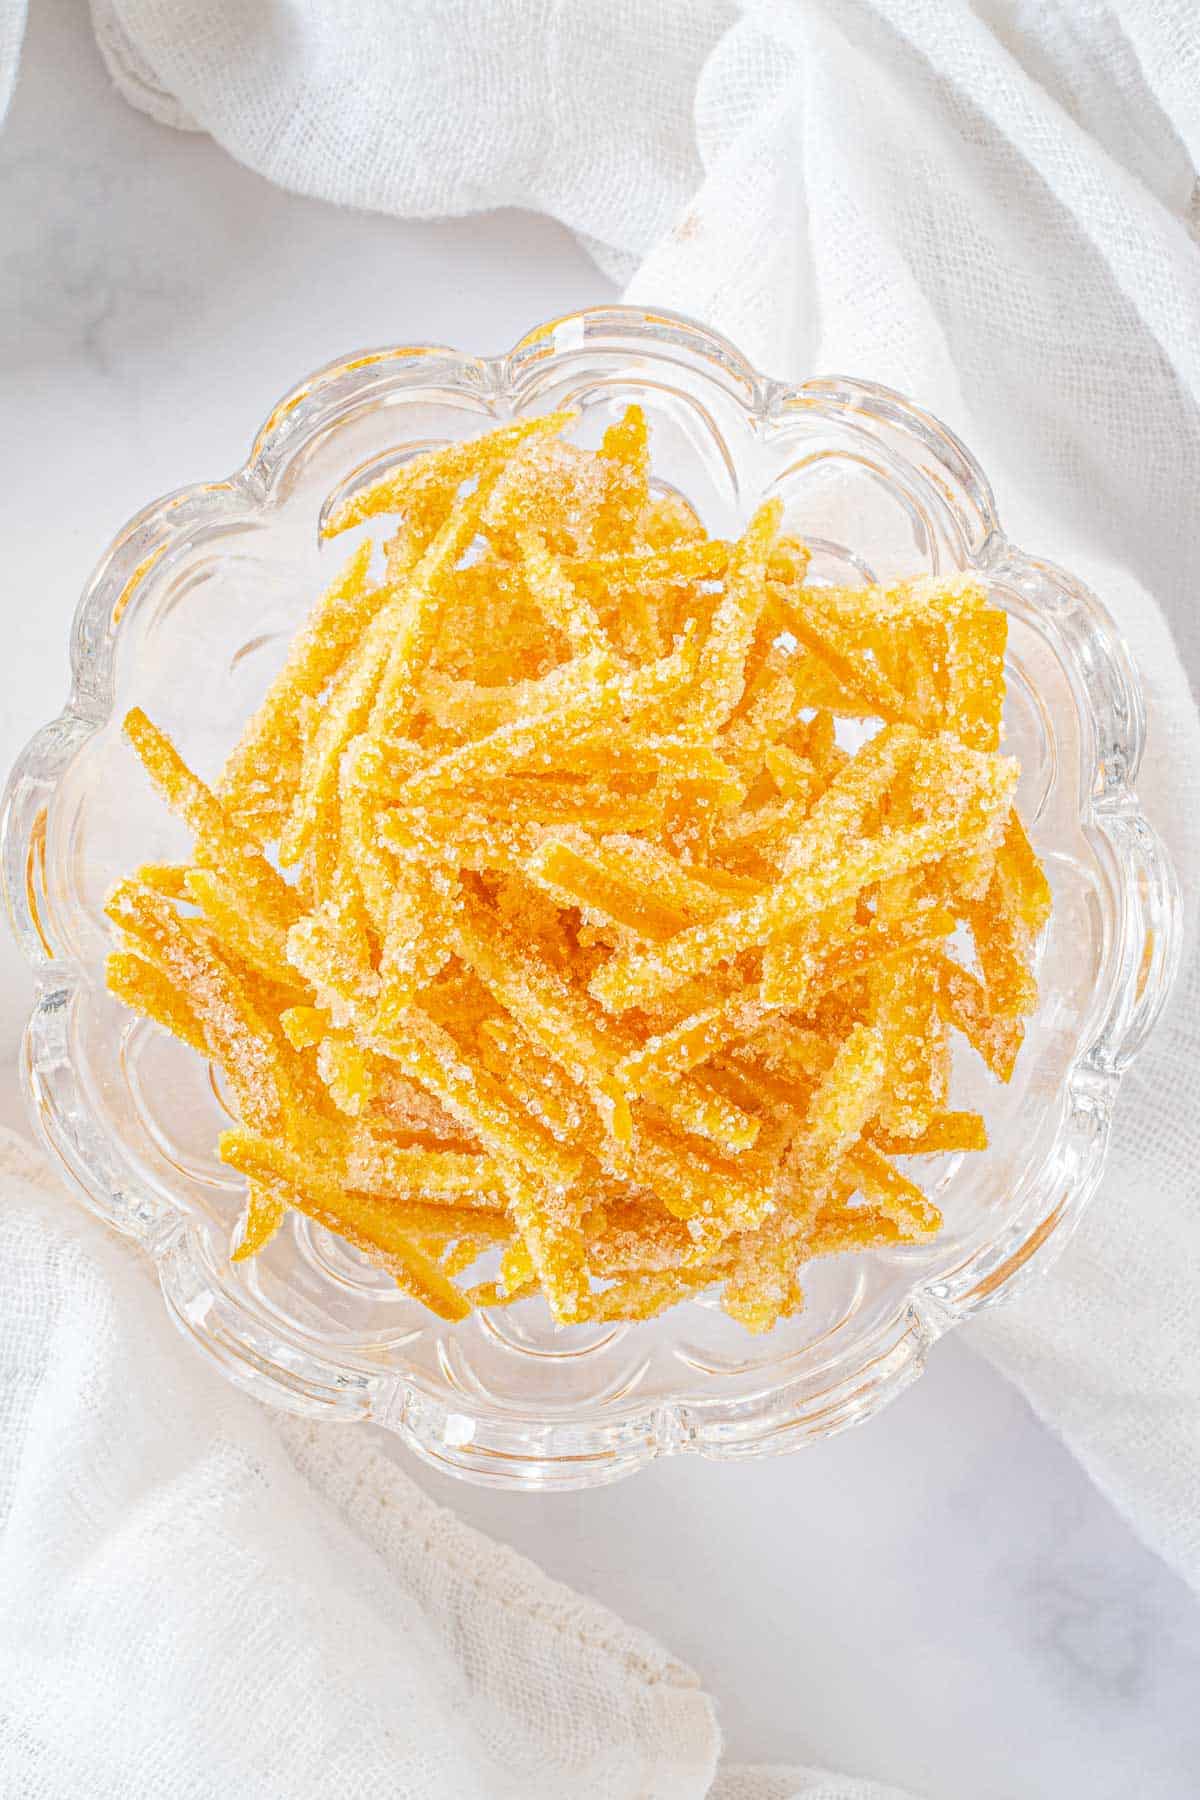 A candy dish filled with orange peel candy